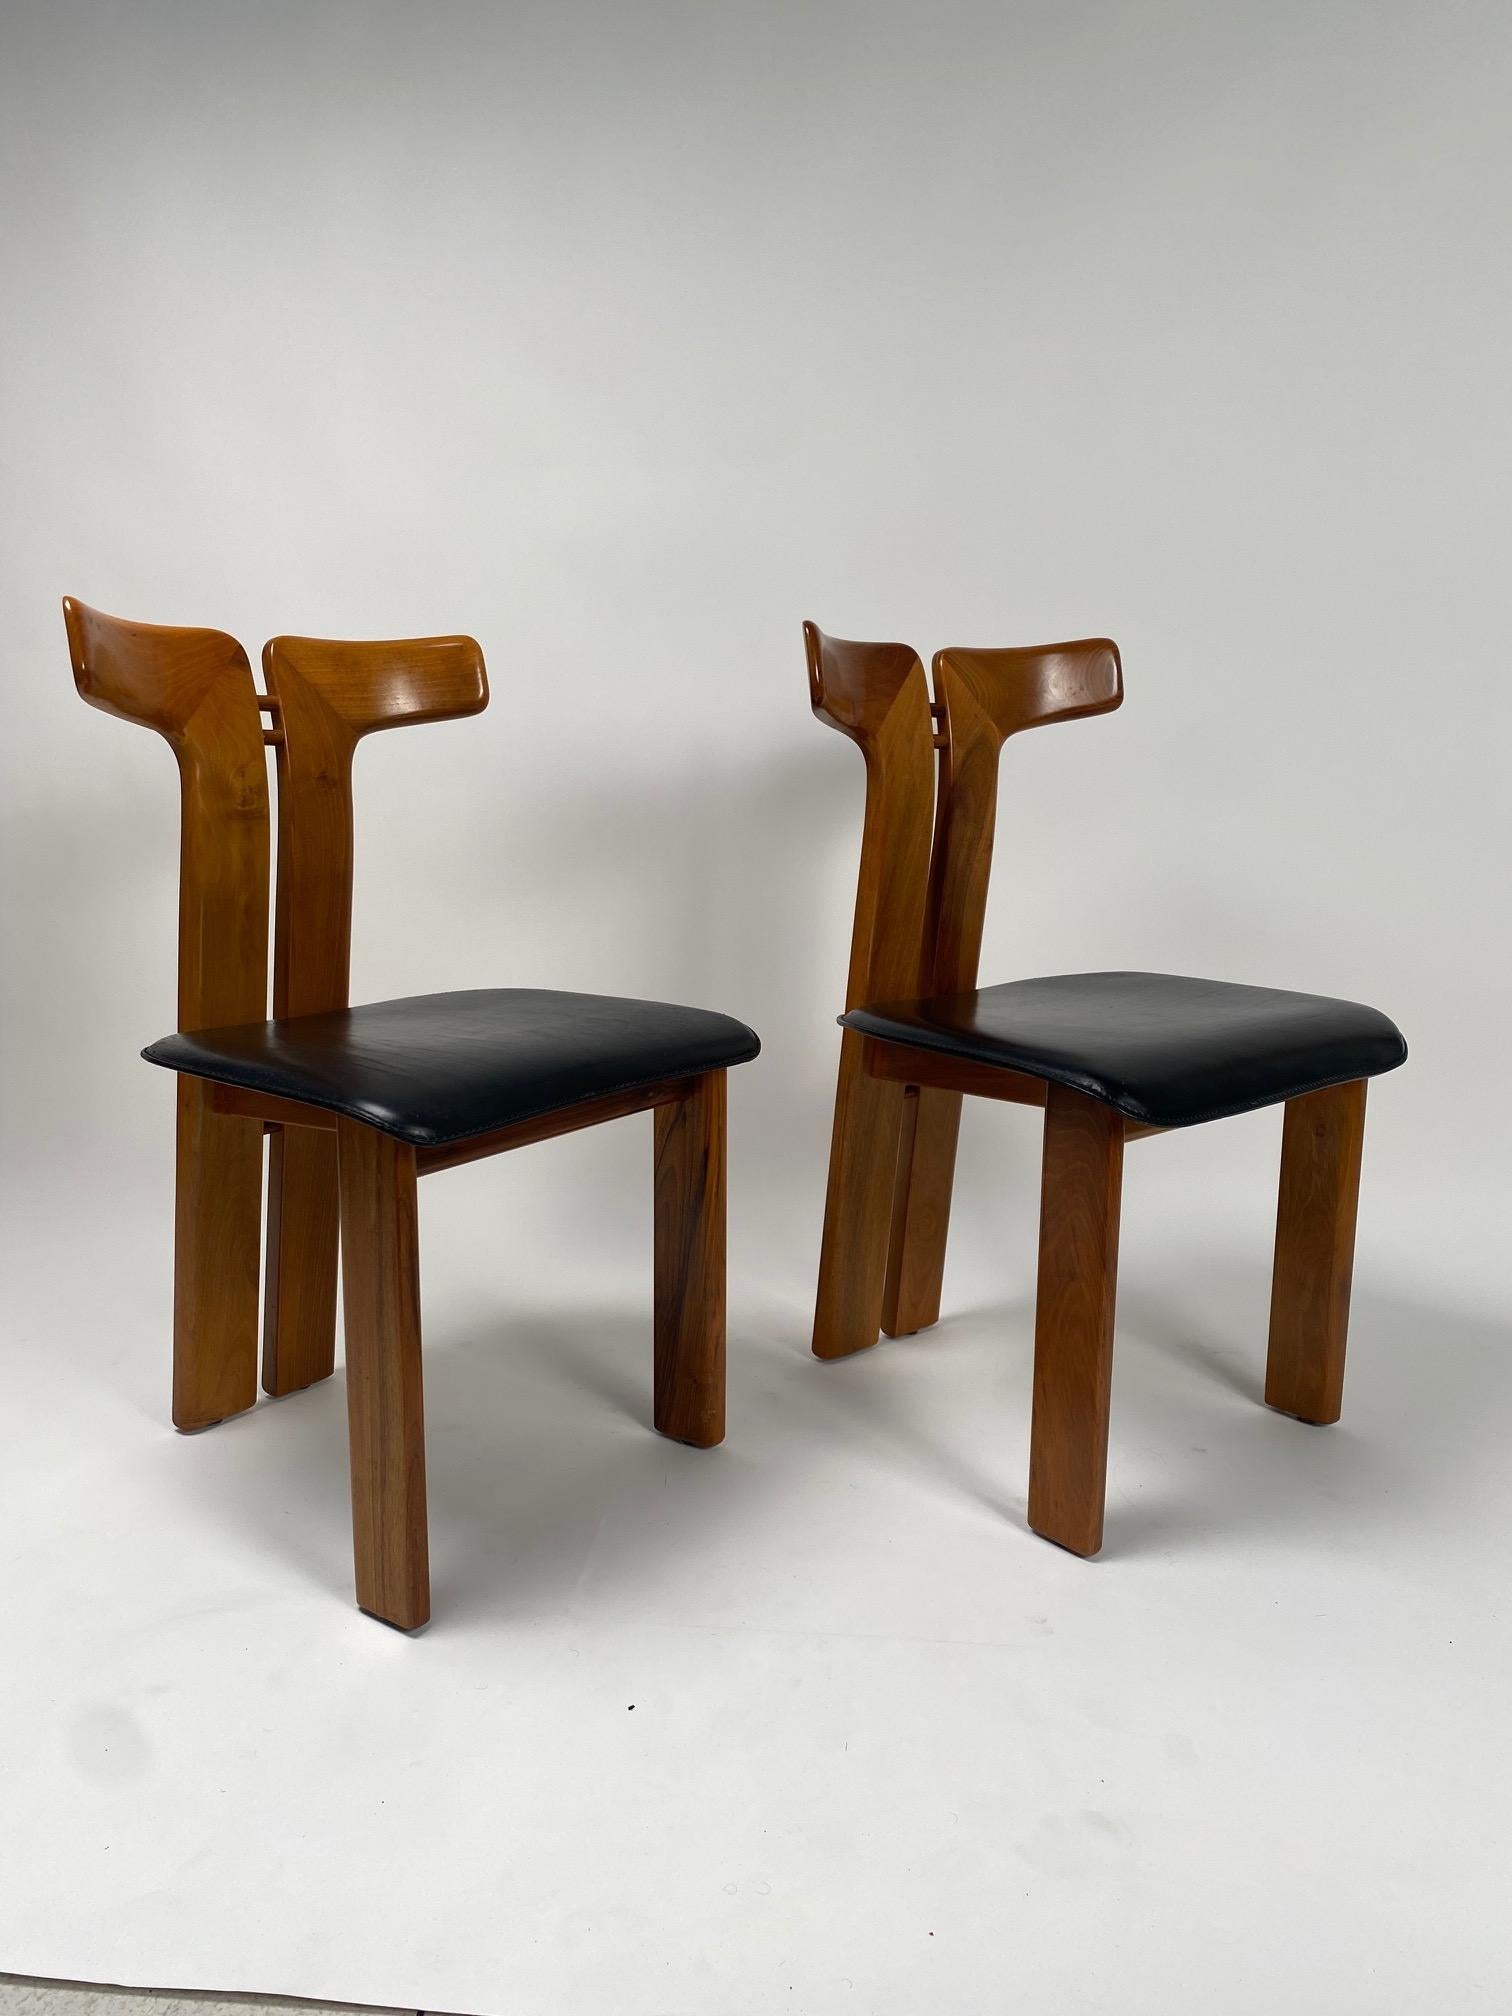 Pierre Cardin, 4 Dining Chairs in Walnut and Leather, 1970s 1